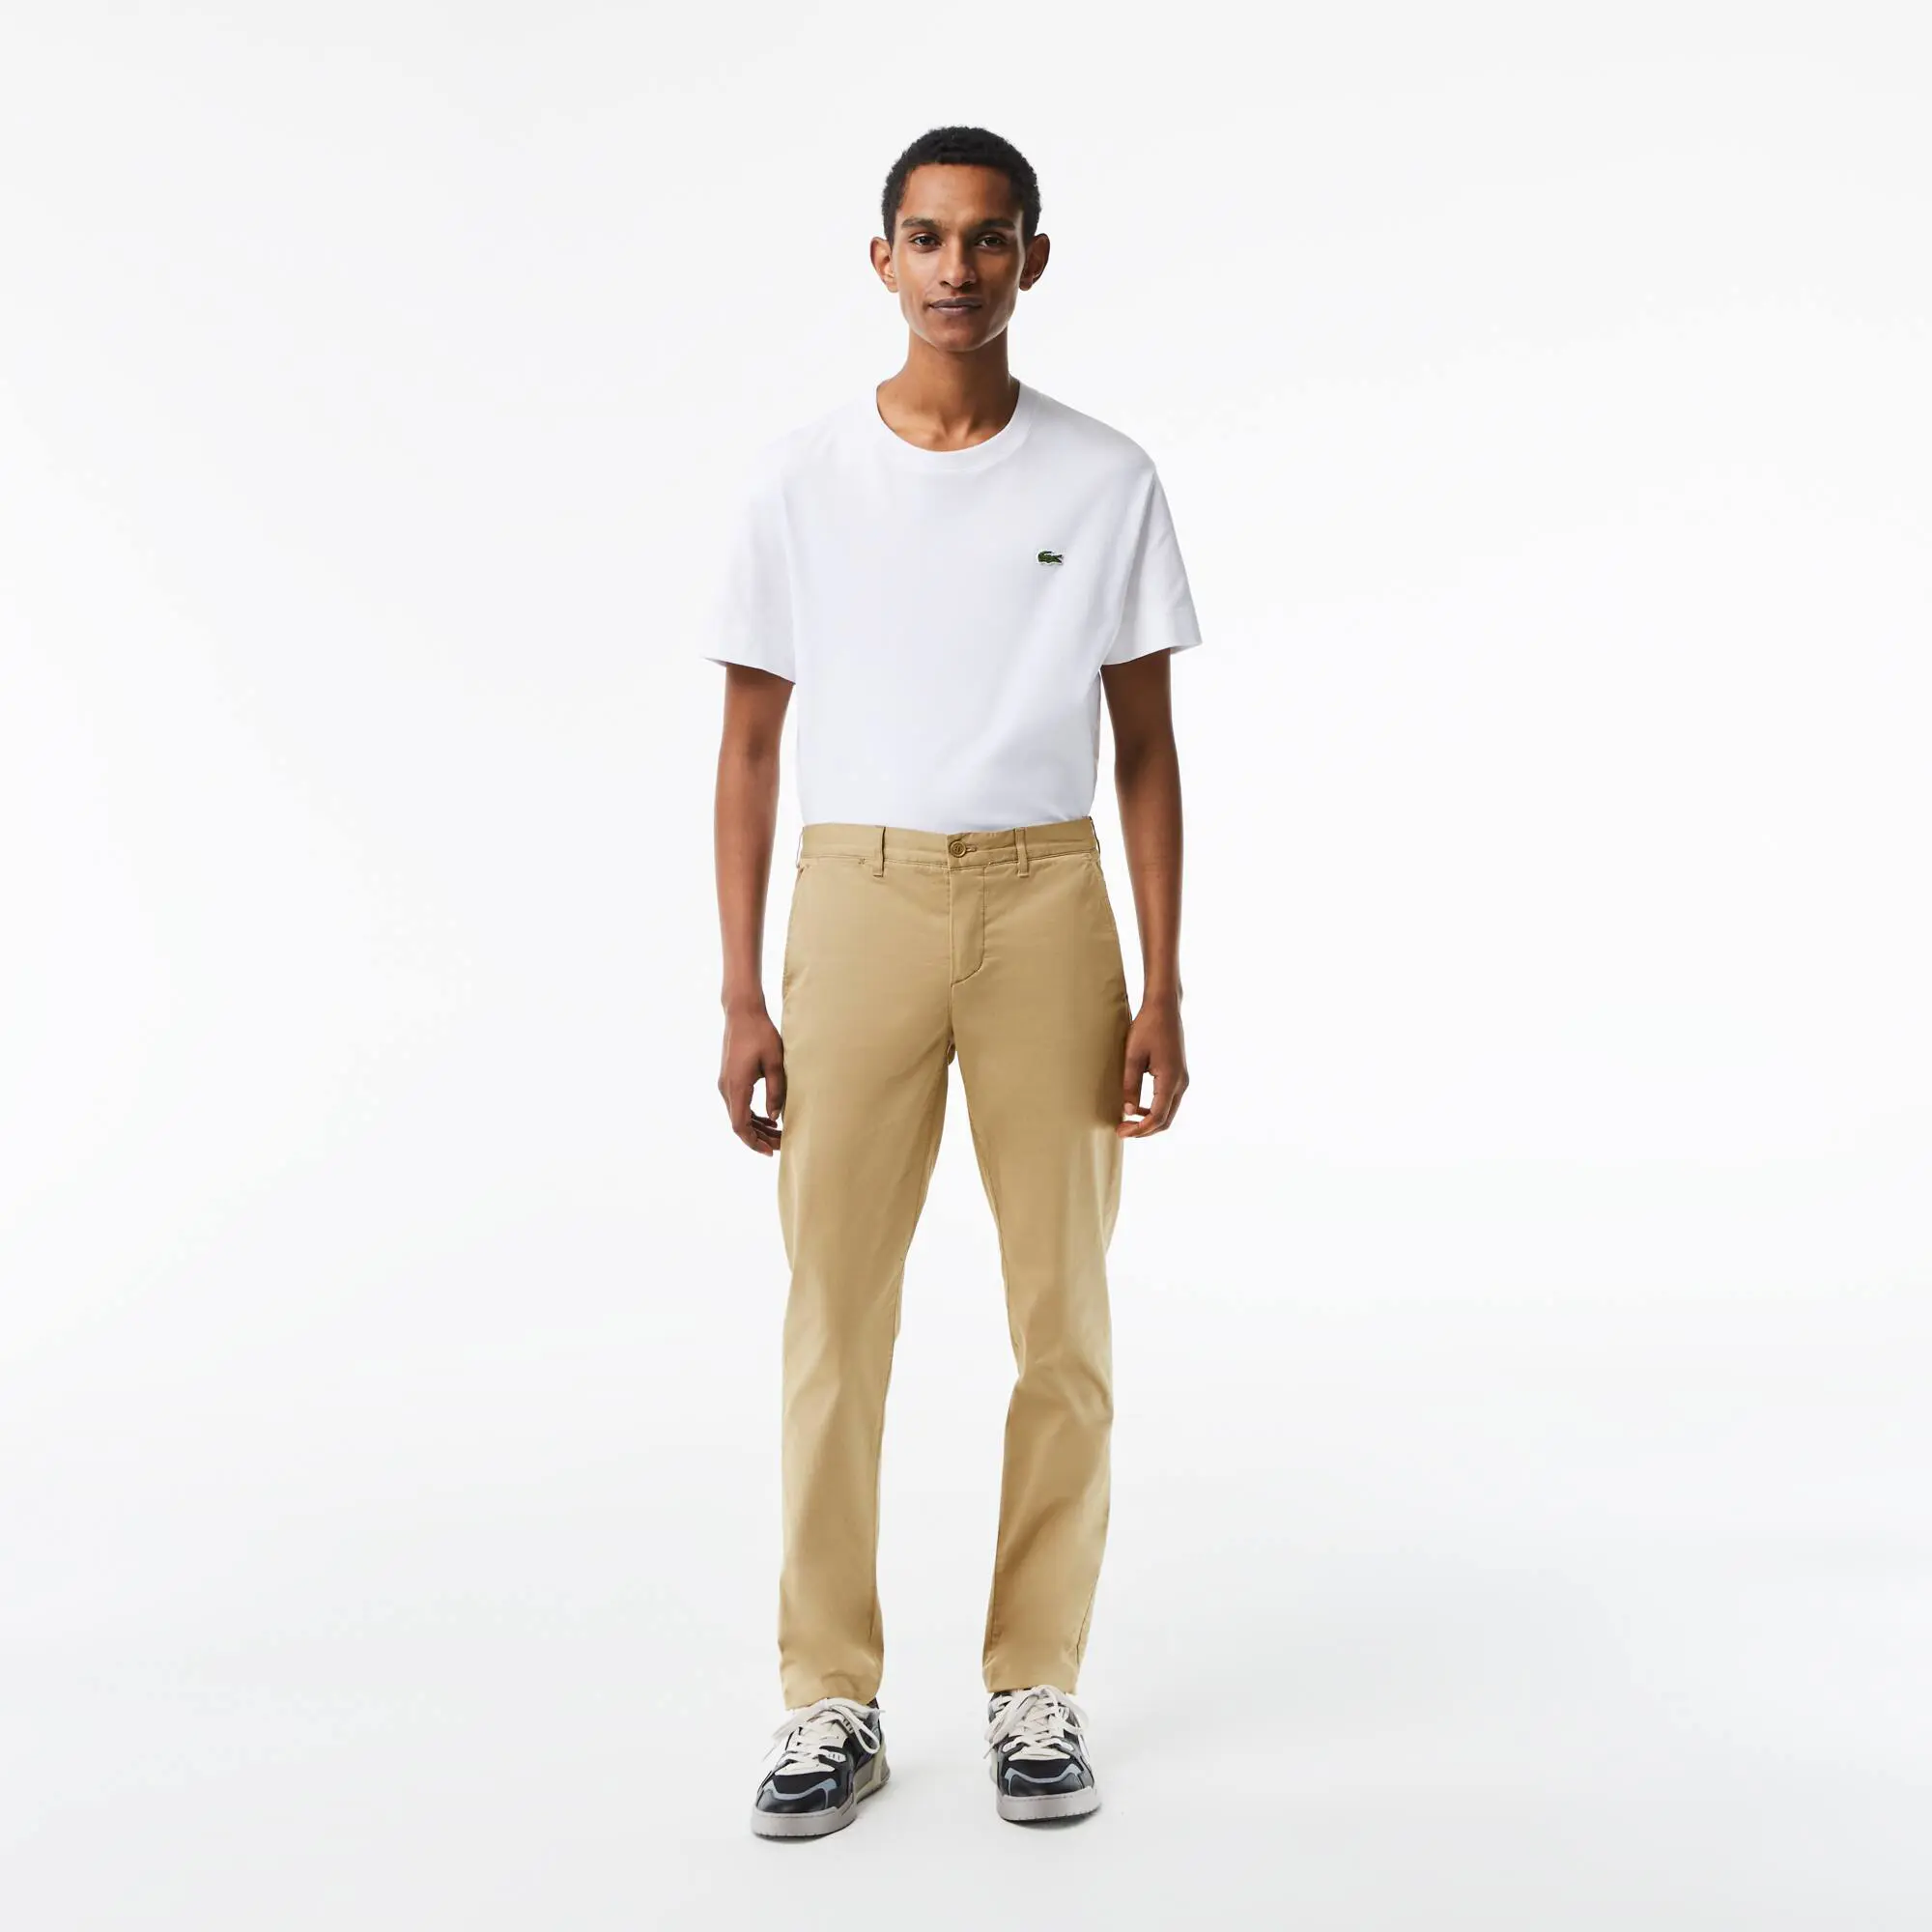 Lacoste Men's Slim Fit Stretch Cotton Chino Trousers. 1